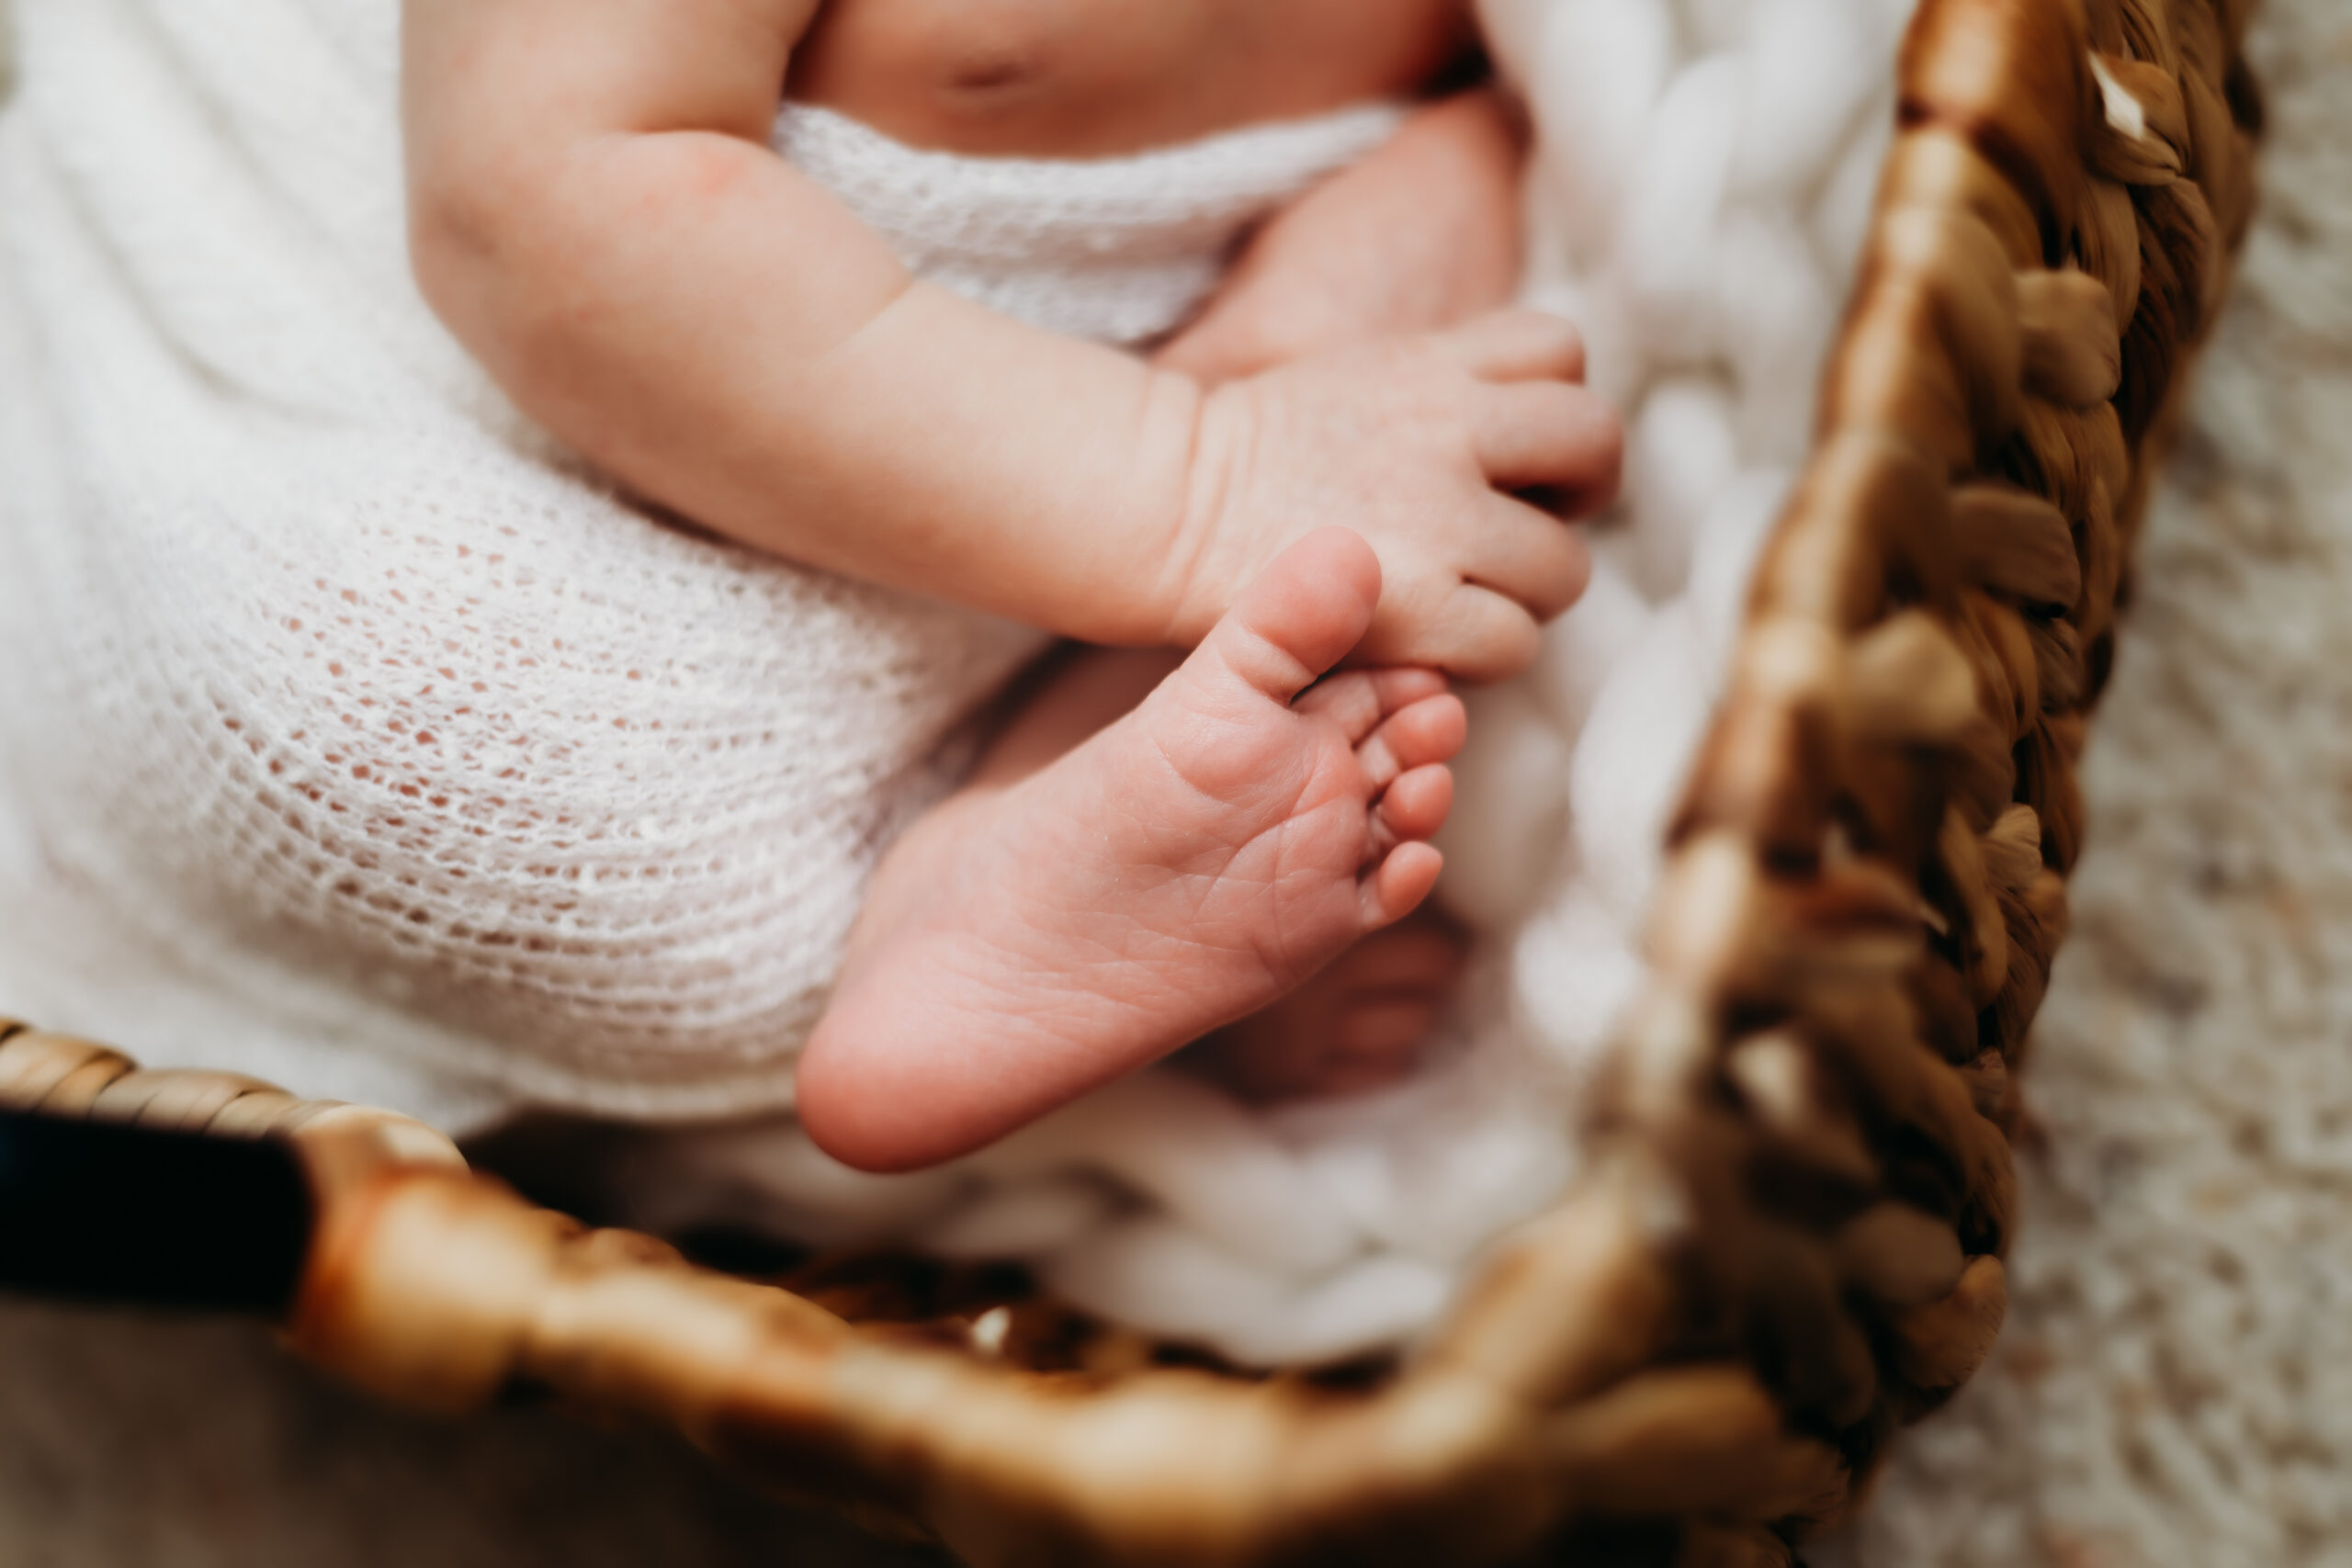 Closeup of newborn baby toes and fingers while sleeping in basket.